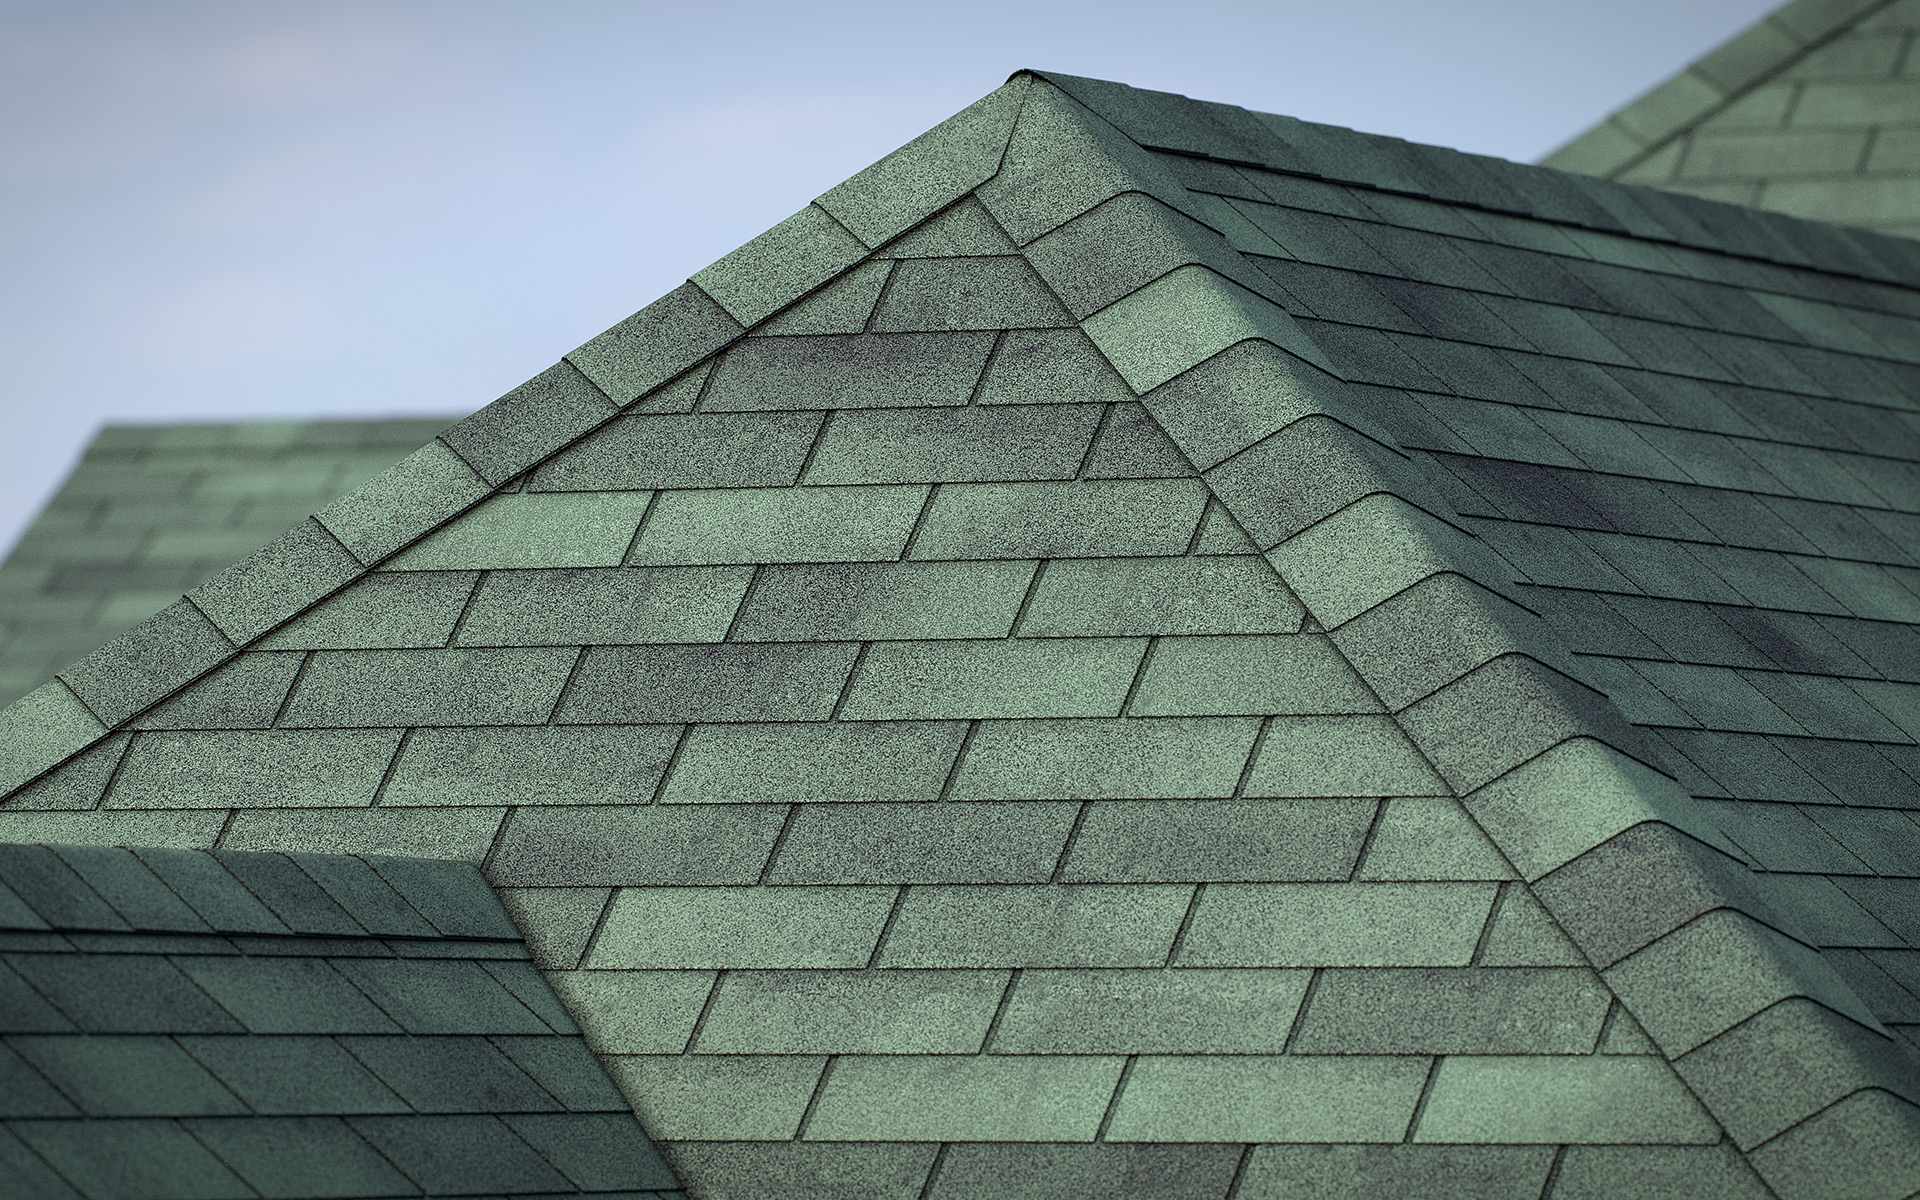 3-tab asphalt roof shingles green color 3D model preset for 3dsmax and RailClone. Rendered with vray, made for arch-viz.